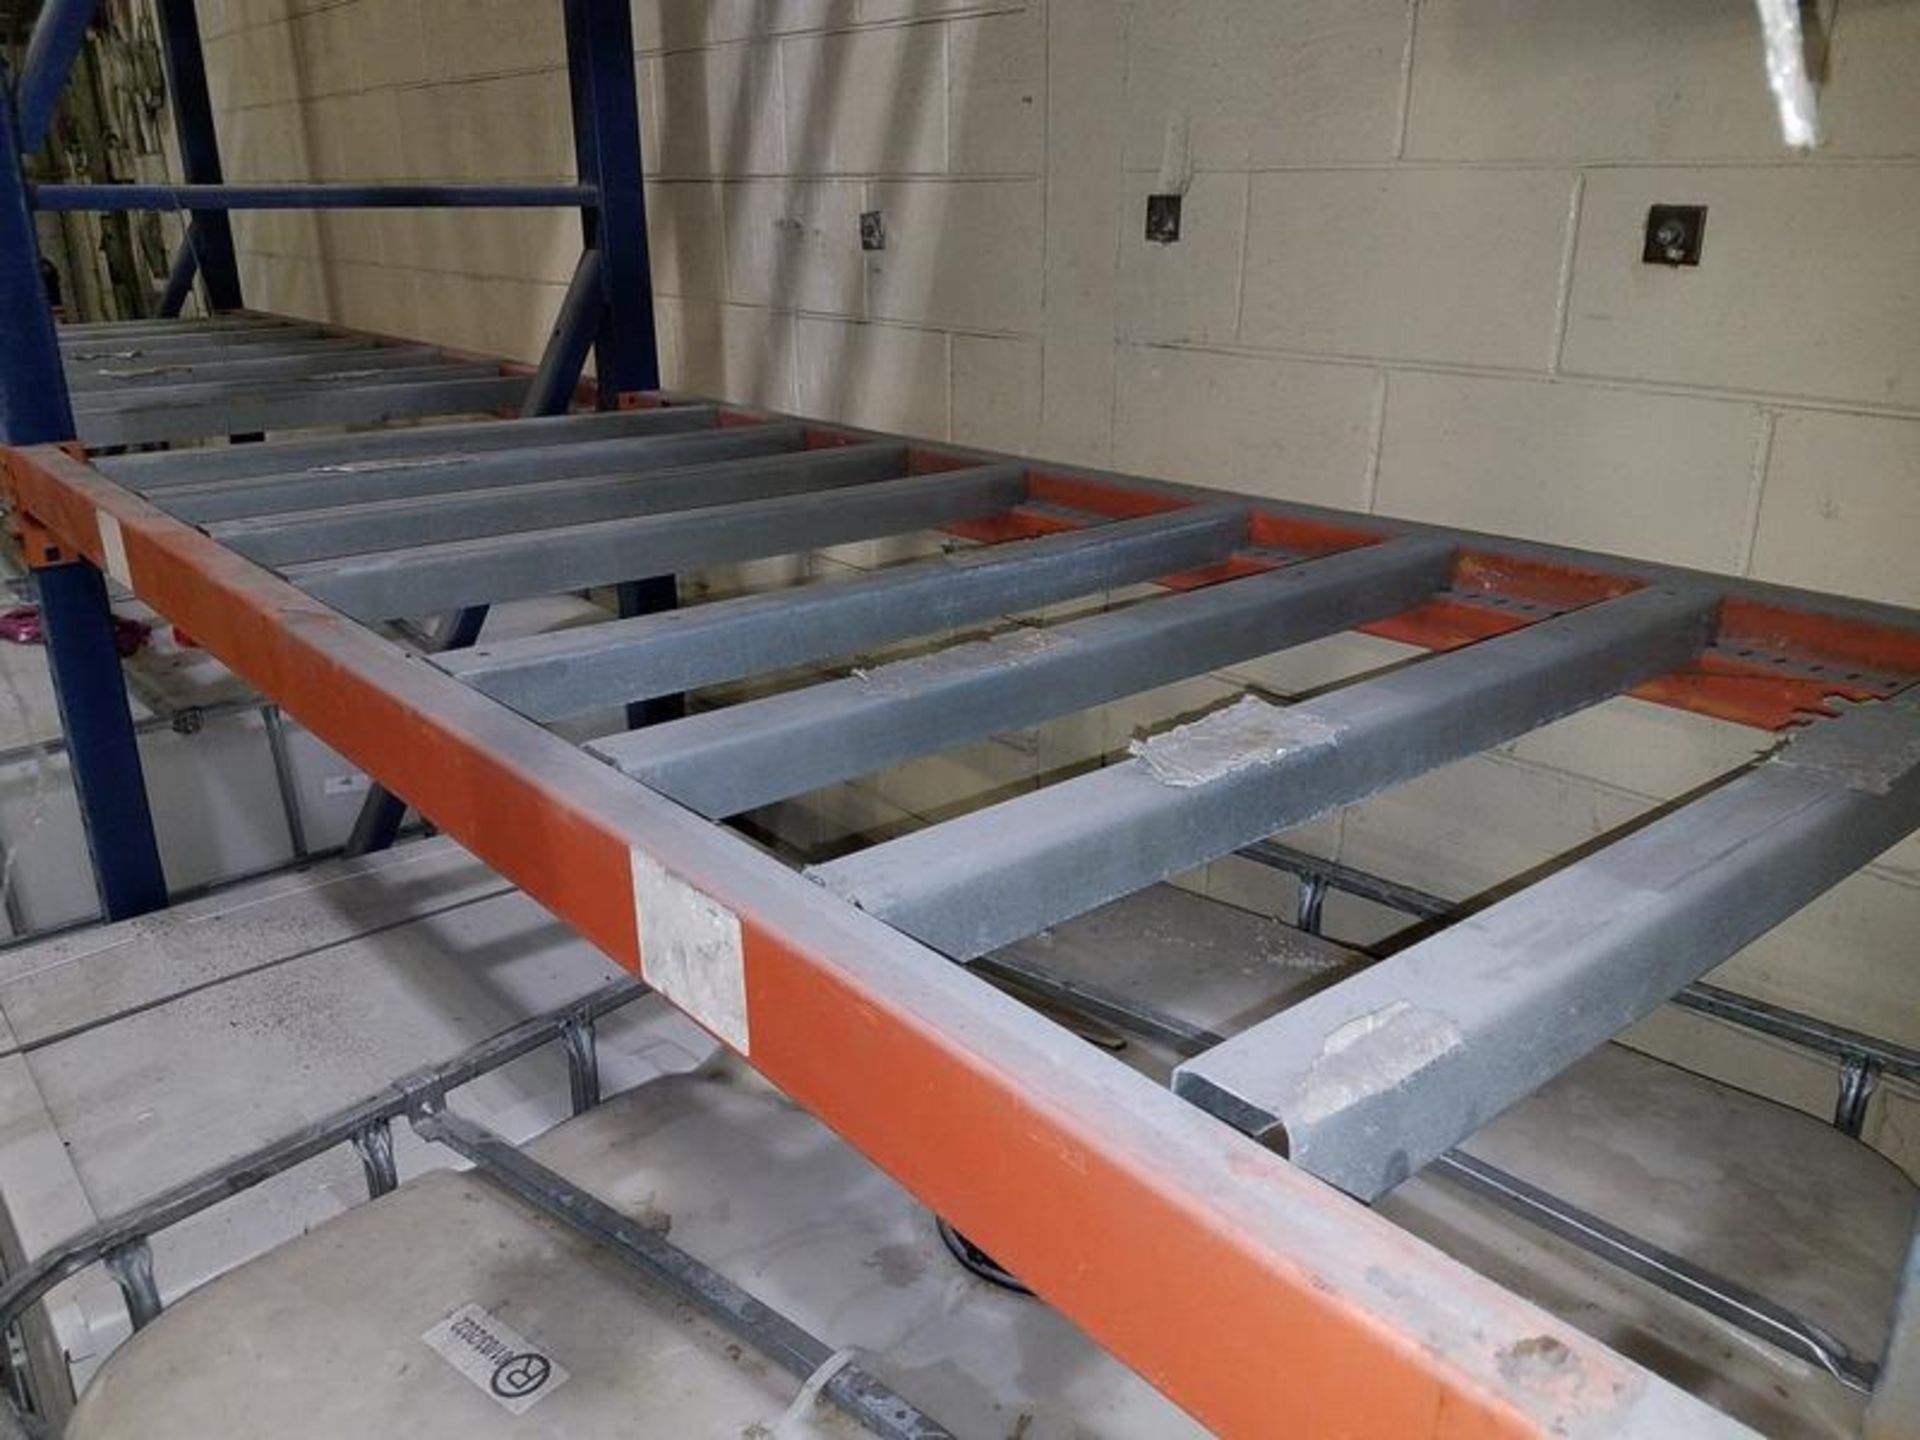 LOT (2) Sections of Adjustable Pallet Racking, 7' x 36" x 18'H, Contents Not Included - Image 3 of 3